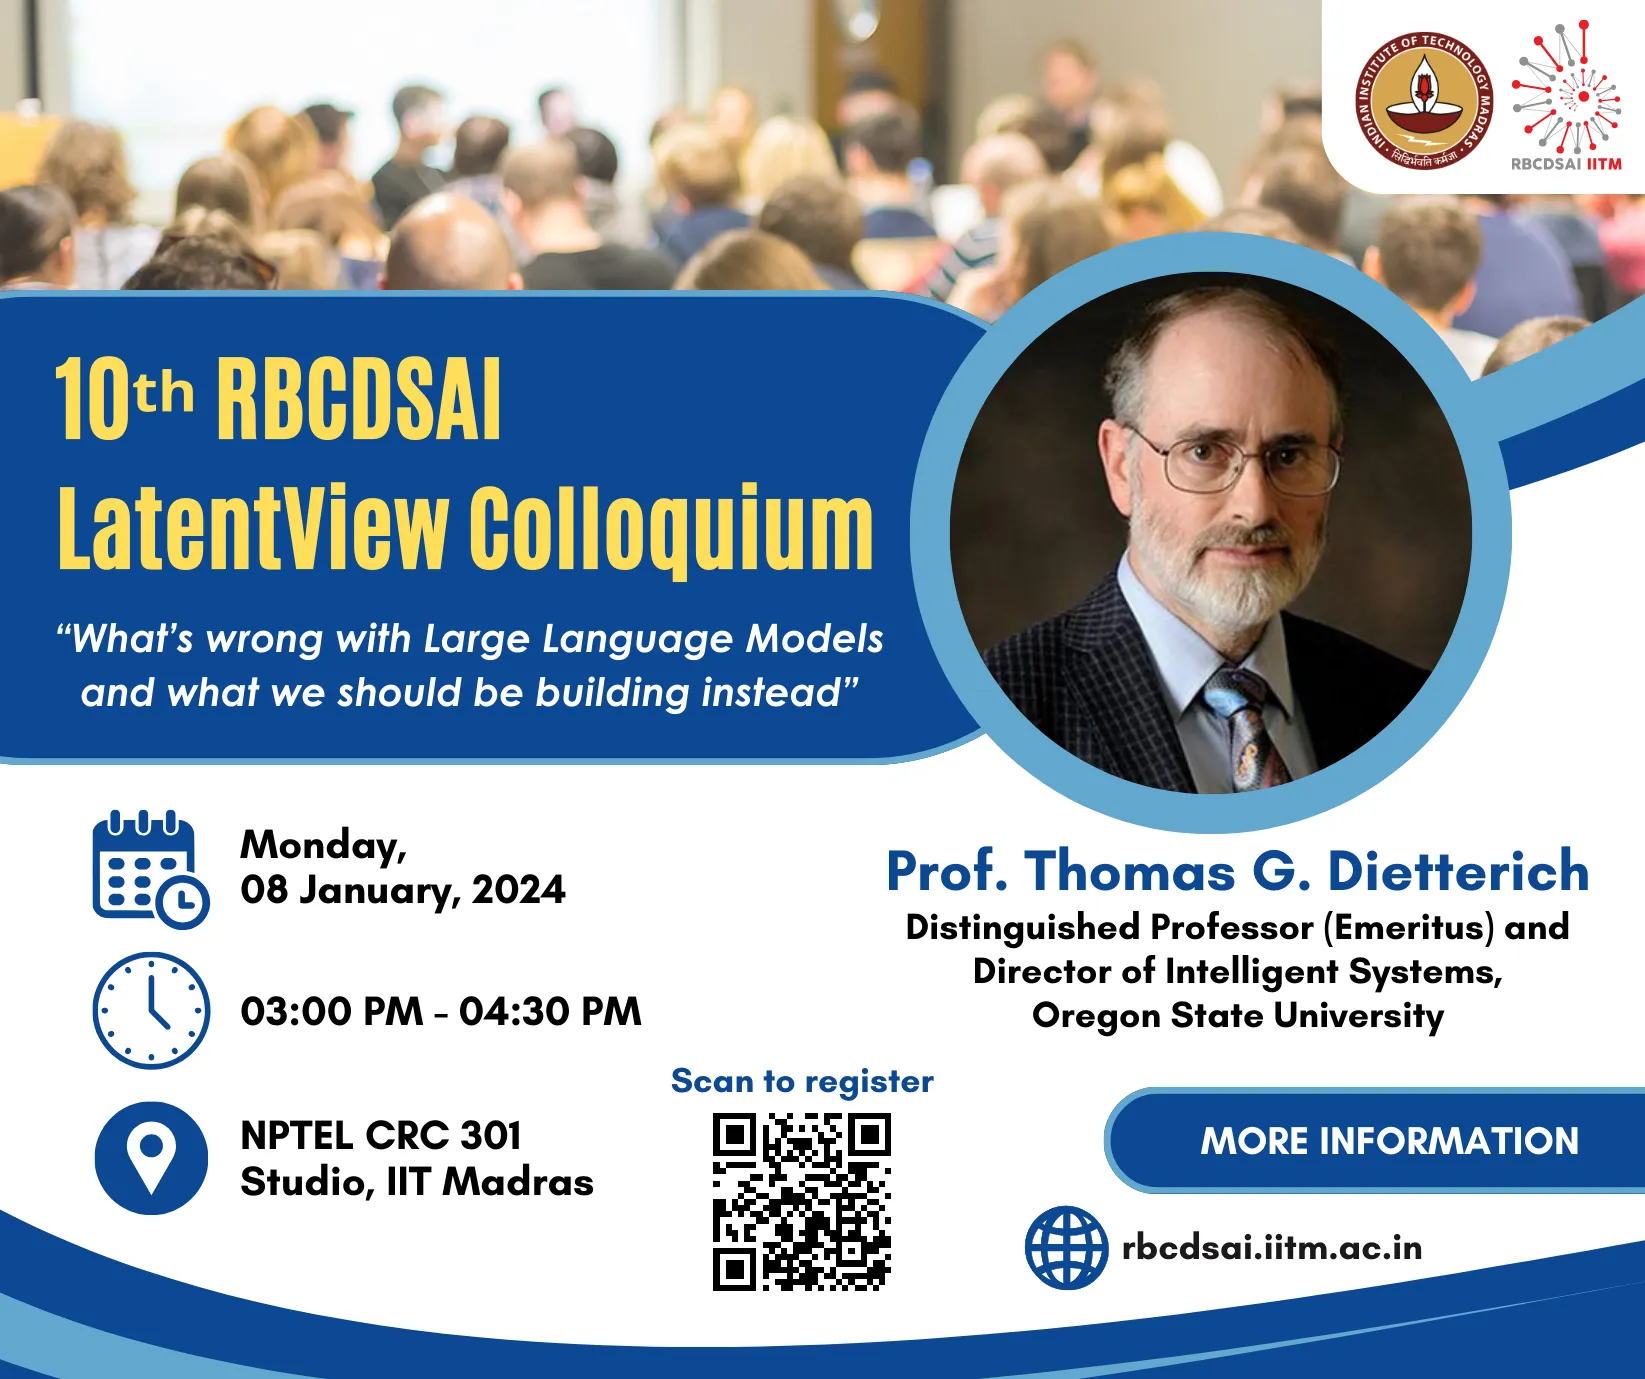 Tenth RBCDSAI LatentView Colloquium by Prof. Thomas G. Dietterich